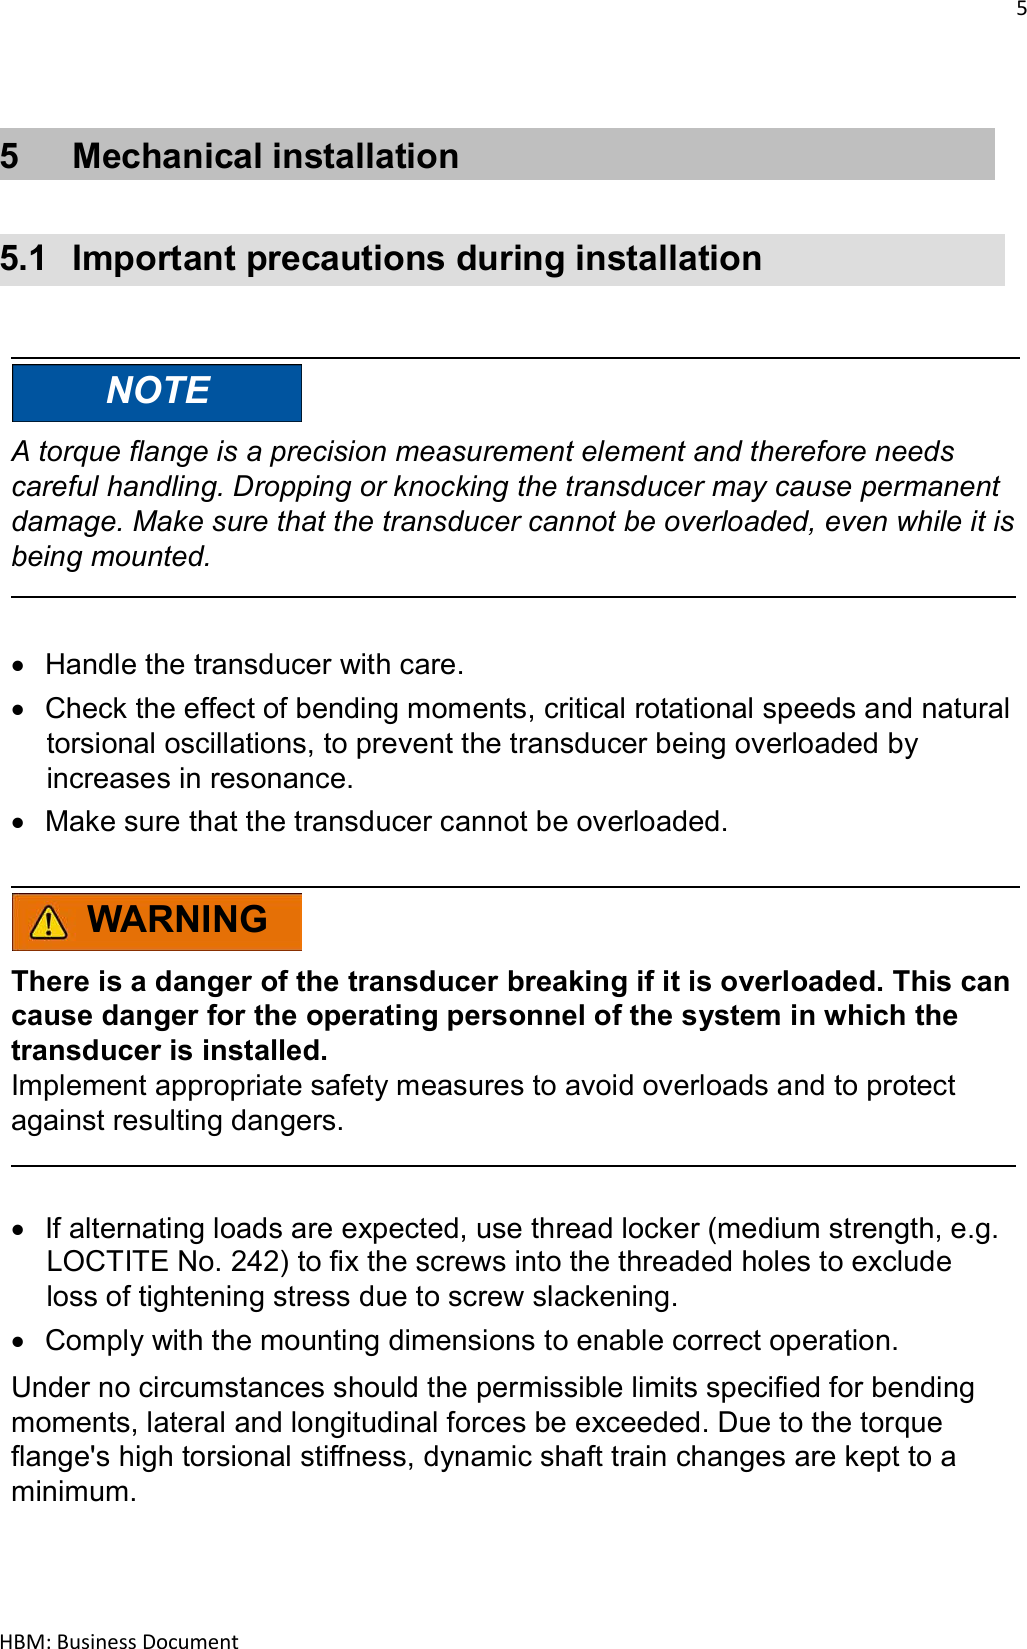 5  HBM: Business Document   5  Mechanical installation   5.1  Important precautions during installation     NOTE  A torque flange is a precision measurement element and therefore needs careful handling. Dropping or knocking the transducer may cause permanent damage. Make sure that the transducer cannot be overloaded, even while it is being mounted.     Handle the transducer with care.  Check the effect of bending moments, critical rotational speeds and natural torsional oscillations, to prevent the transducer being overloaded by increases in resonance.  Make sure that the transducer cannot be overloaded.    WARNING  There is a danger of the transducer breaking if it is overloaded. This can cause danger for the operating personnel of the system in which the transducer is installed. Implement appropriate safety measures to avoid overloads and to protect against resulting dangers.     If alternating loads are expected, use thread locker (medium strength, e.g. LOCTITE No. 242) to fix the screws into the threaded holes to exclude loss of tightening stress due to screw slackening.  Comply with the mounting dimensions to enable correct operation.  Under no circumstances should the permissible limits specified for bending moments, lateral and longitudinal forces be exceeded. Due to the torque flange&apos;s high torsional stiffness, dynamic shaft train changes are kept to a minimum. 